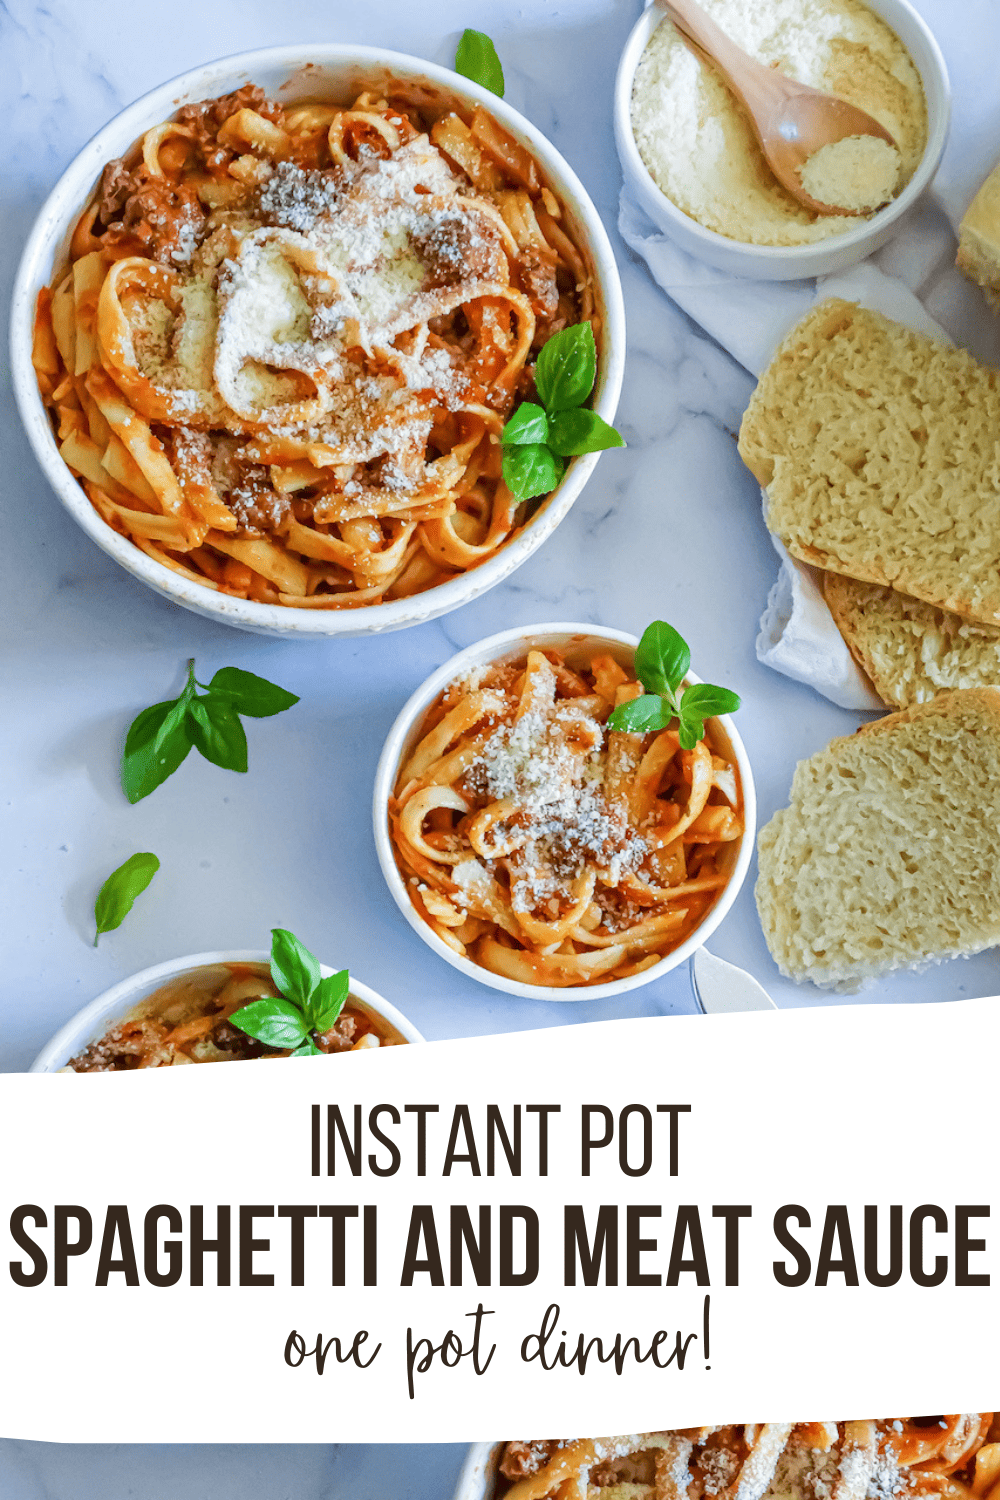 Quick & Easy Instant Pot Spaghetti and Meat Sauce Recipe